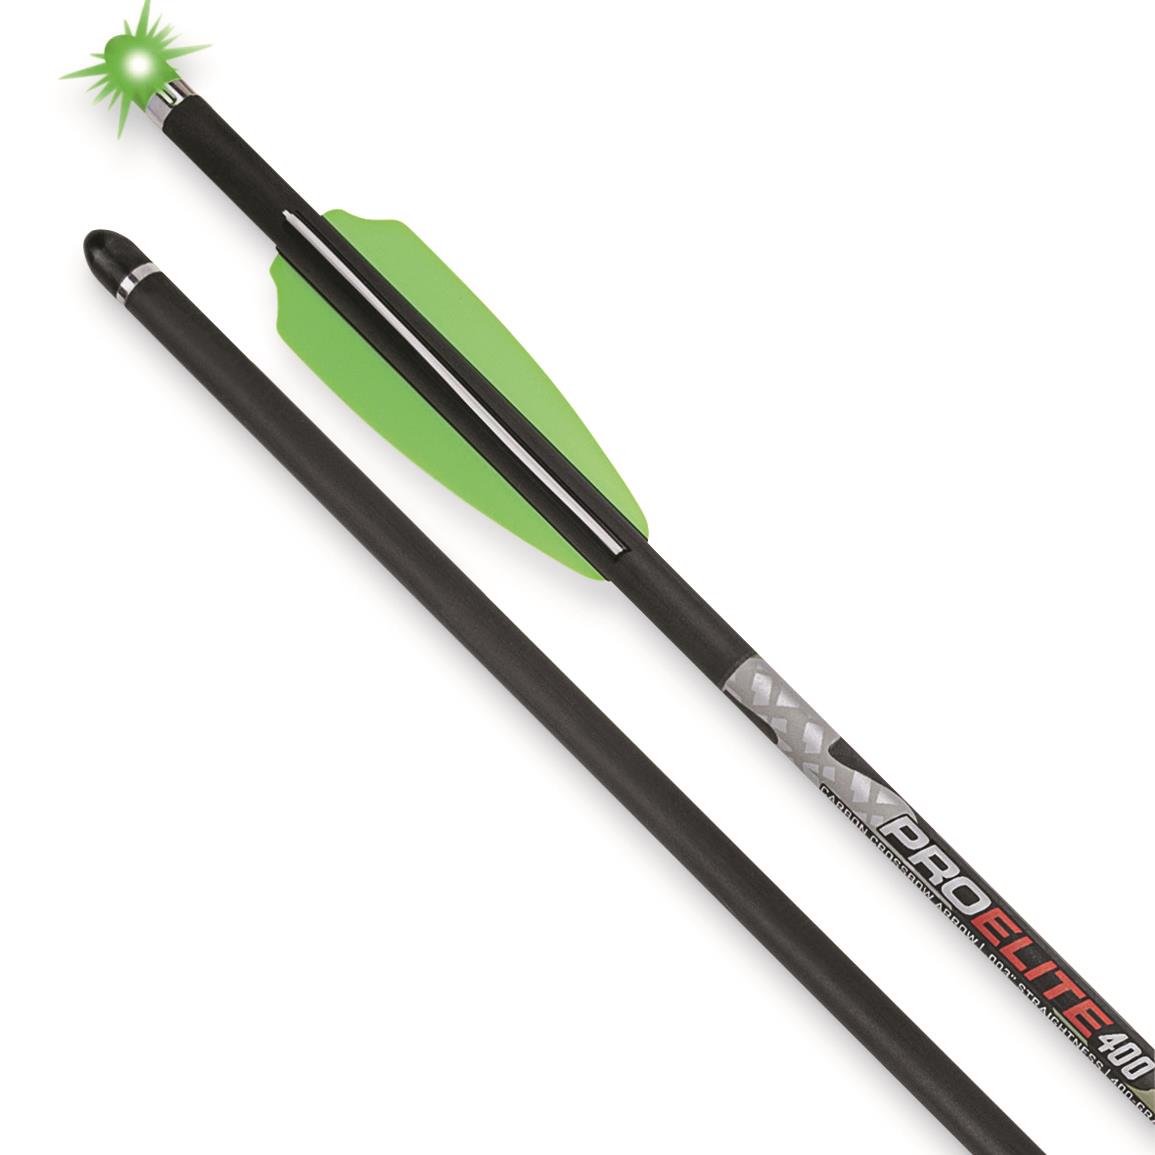 NEW! TenPoint Pro Elite 400 20" Carbon Crossbow Bolts with Alpha-Blaze Lighted Nocks, 3 Pack